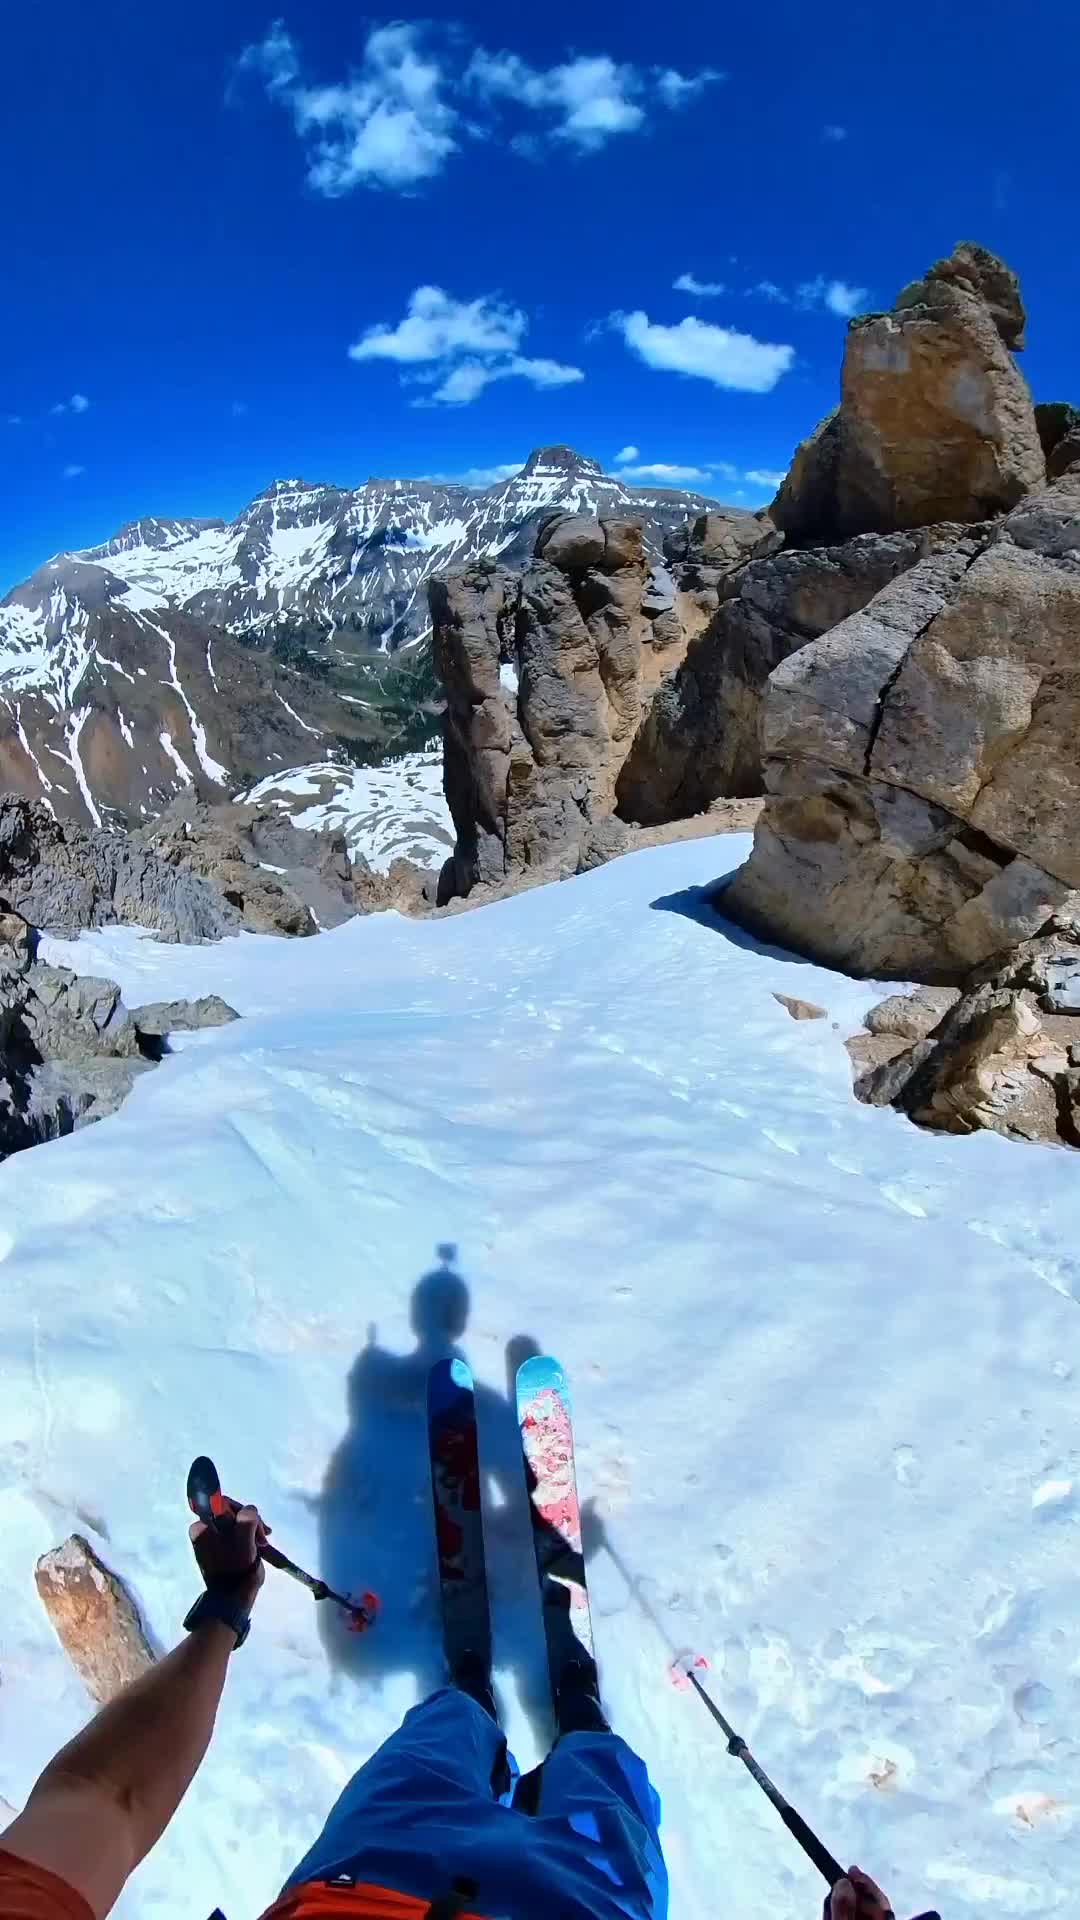 July 1st Skiing in Colorado's Scenic Mountains